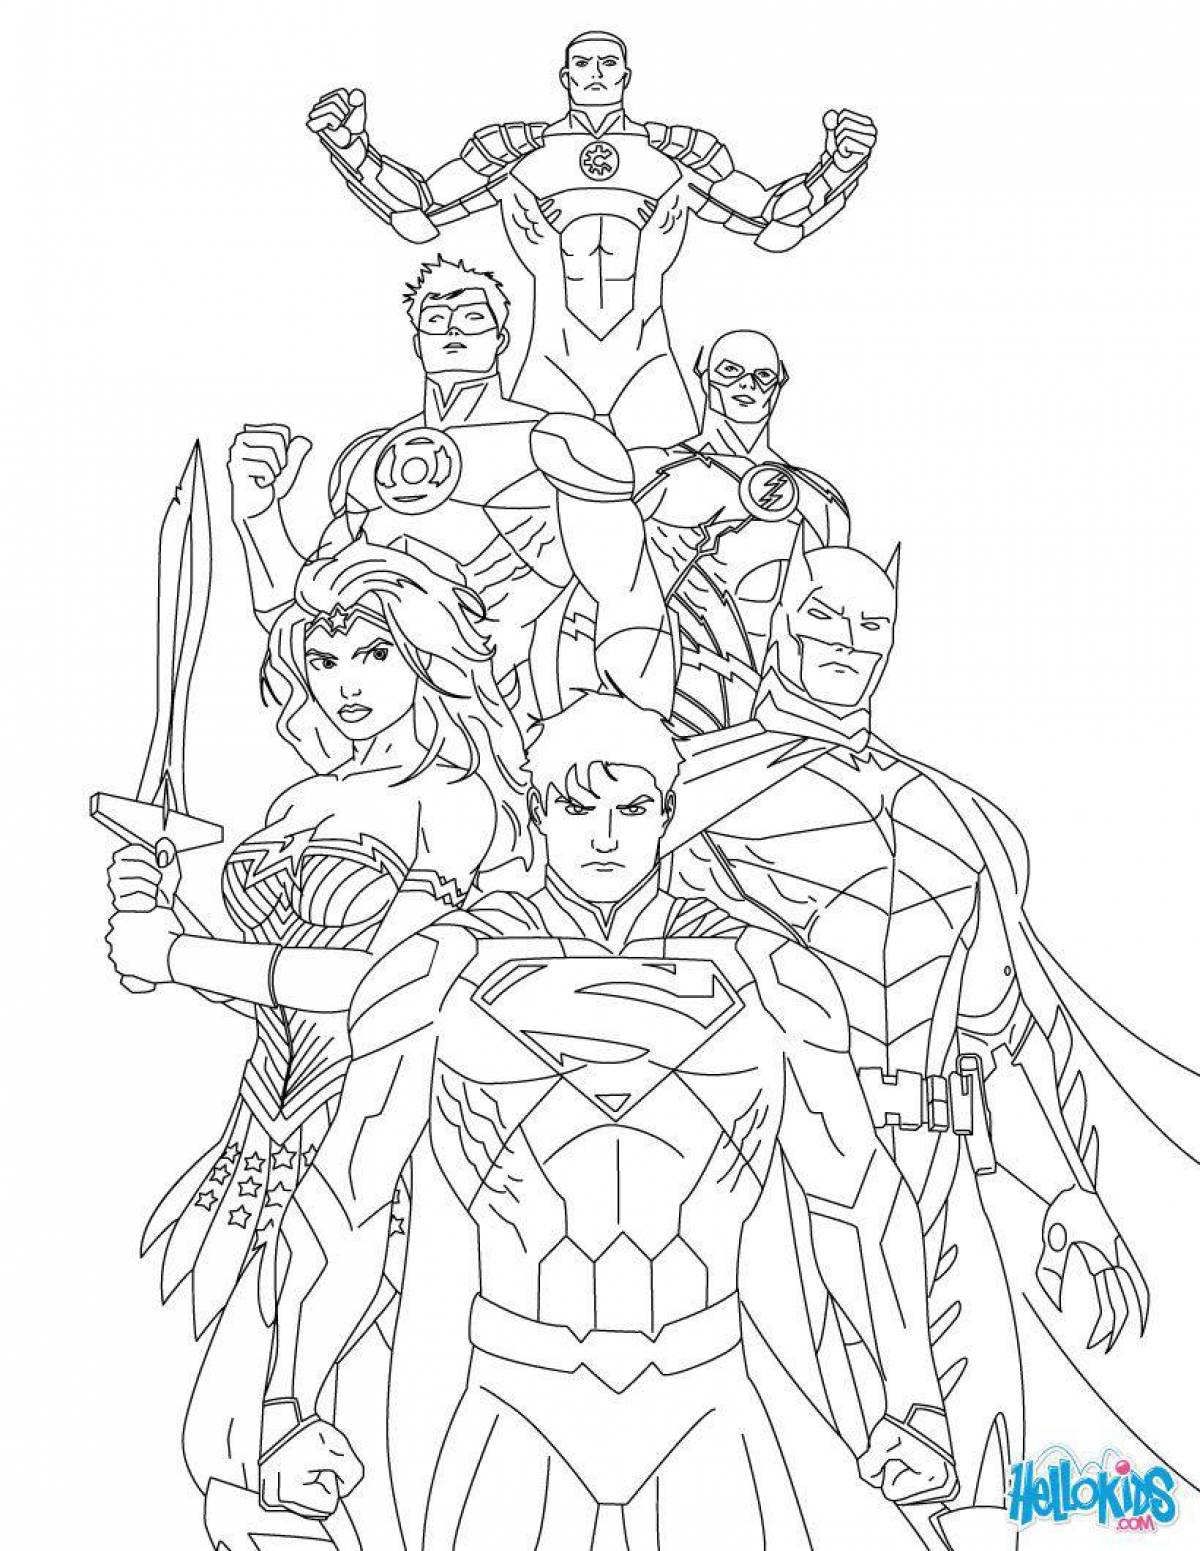 Cool superheroes coloring pages for kids